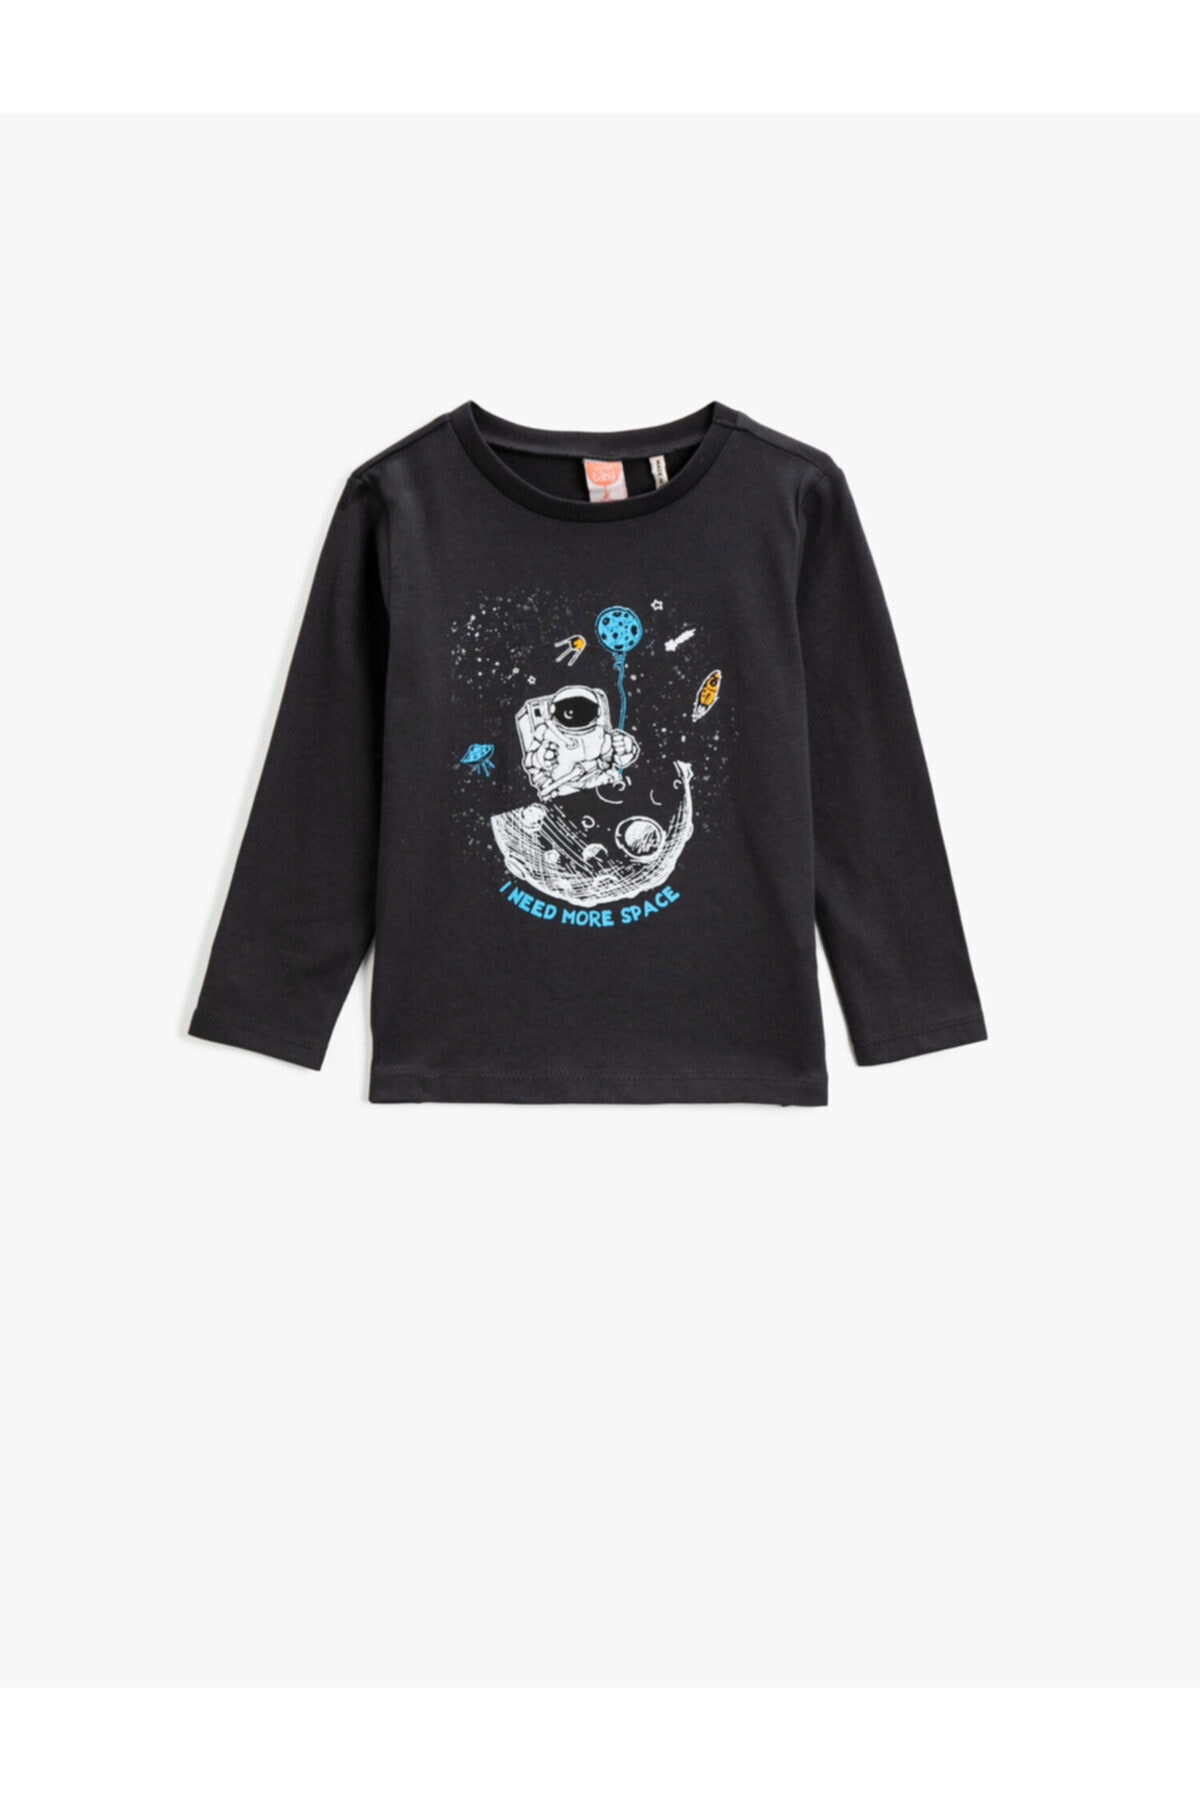 Koton Boys' Anthracite Space Print Long Sleeved T-Shirt Cotton